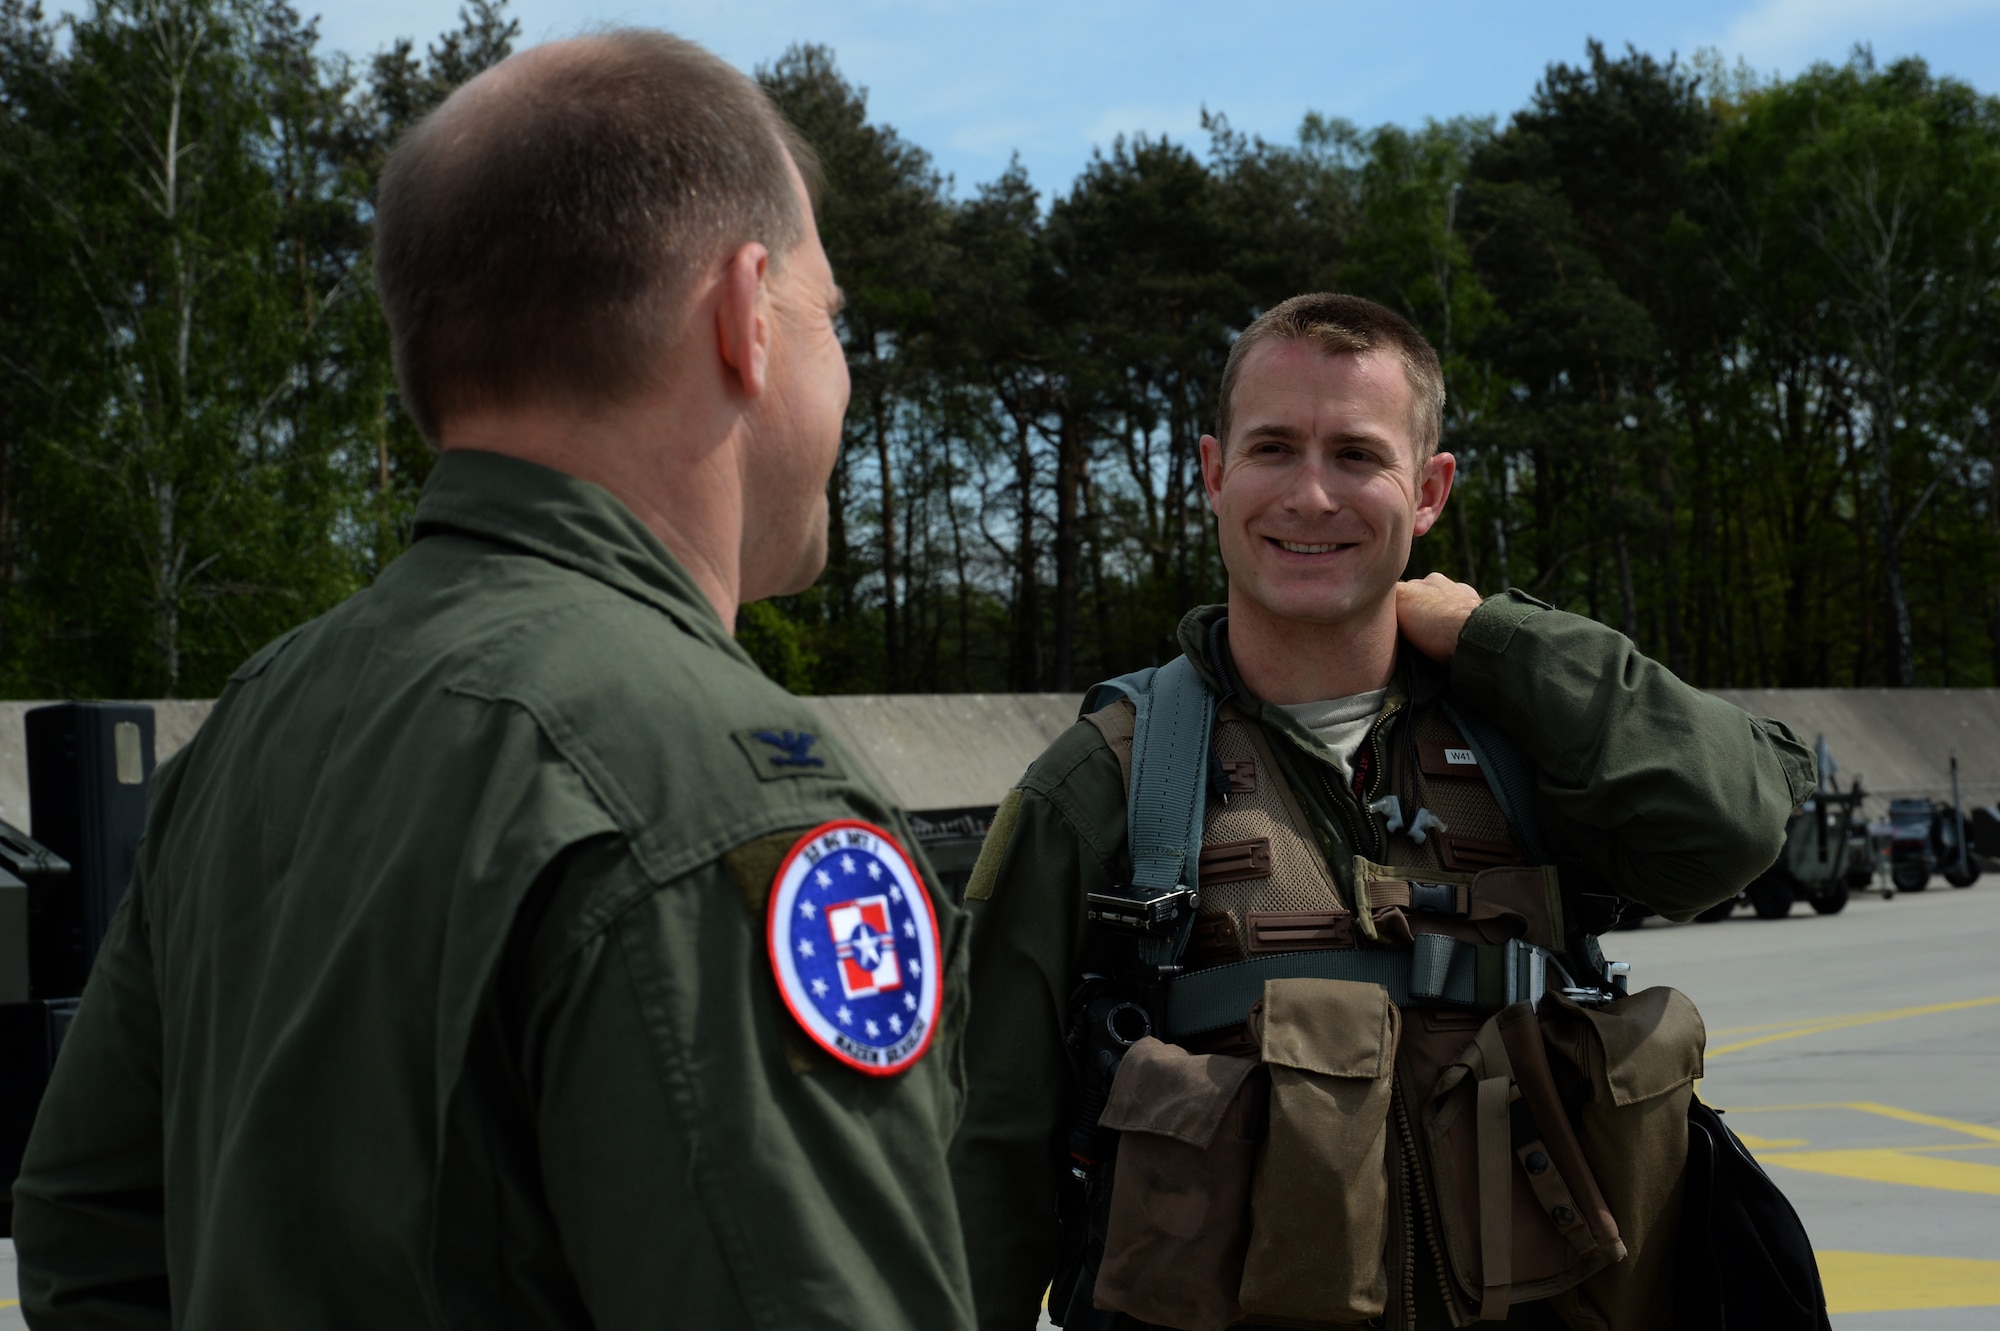 U.S. Air Force Col. Robert Winkler, 52nd Operations Group commander, left, speaks with Capt. Anthony Kiggins, a 480th Fighter Squadron pilot, on the flightline at Łask Air Base, Poland, May 7, 2014. Winkler visited with 480th FS pilots who flew F-16 Fighting Falcon aircraft from their home station at Spangdahlem Air Base, Germany, to Łask. (U.S. Air Force photo by Staff Sgt. Joe W. McFadden/Released)